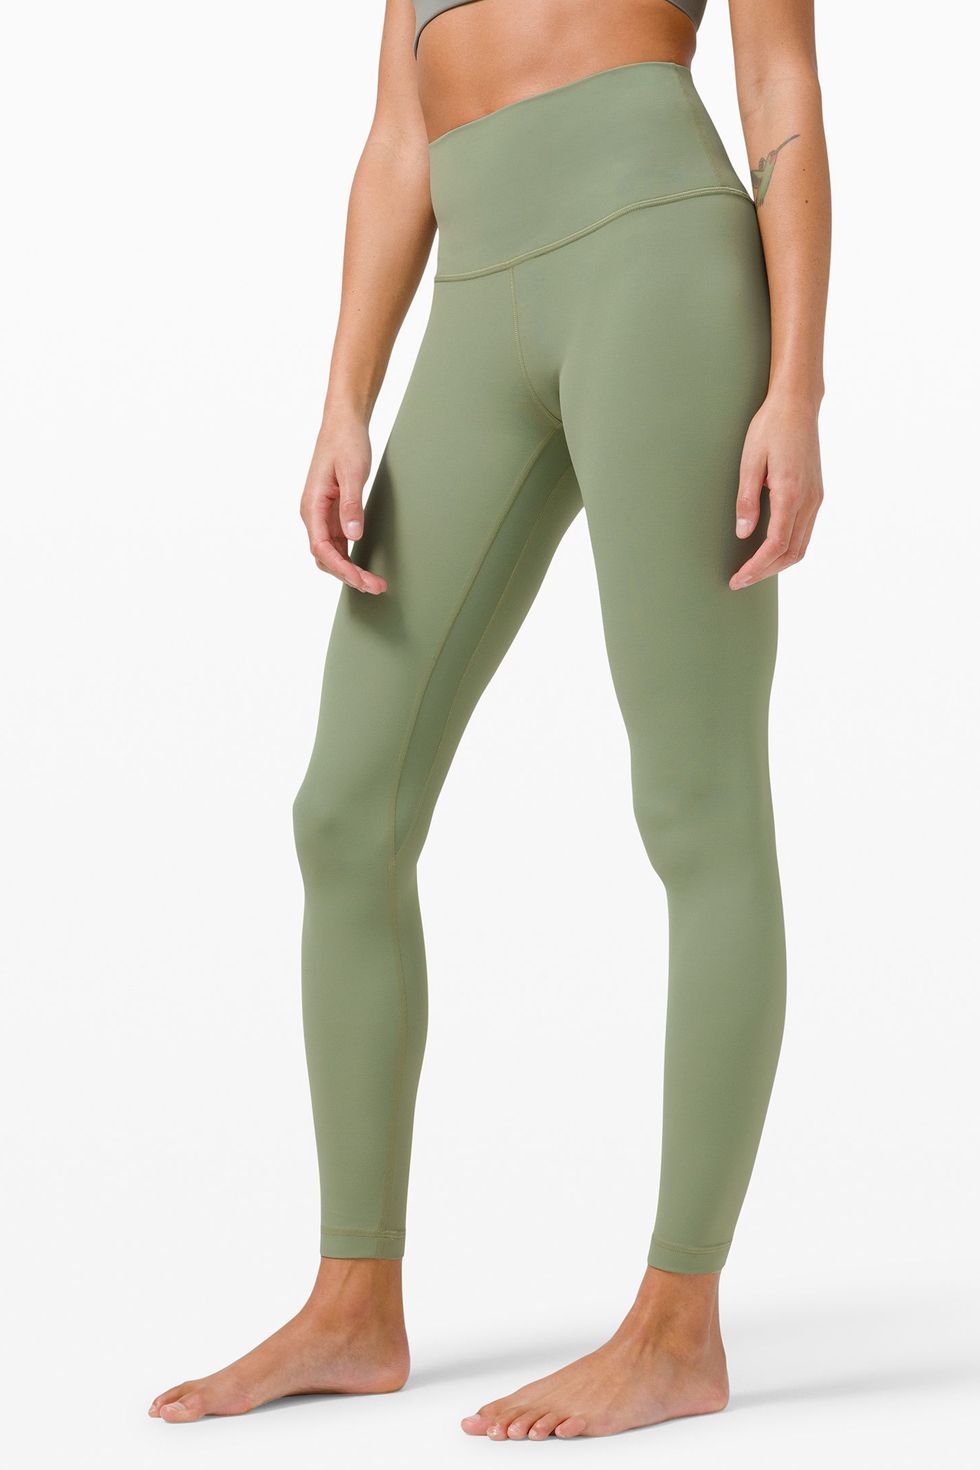 Lululemon Align Leggings Are Discounted—But Not for Long